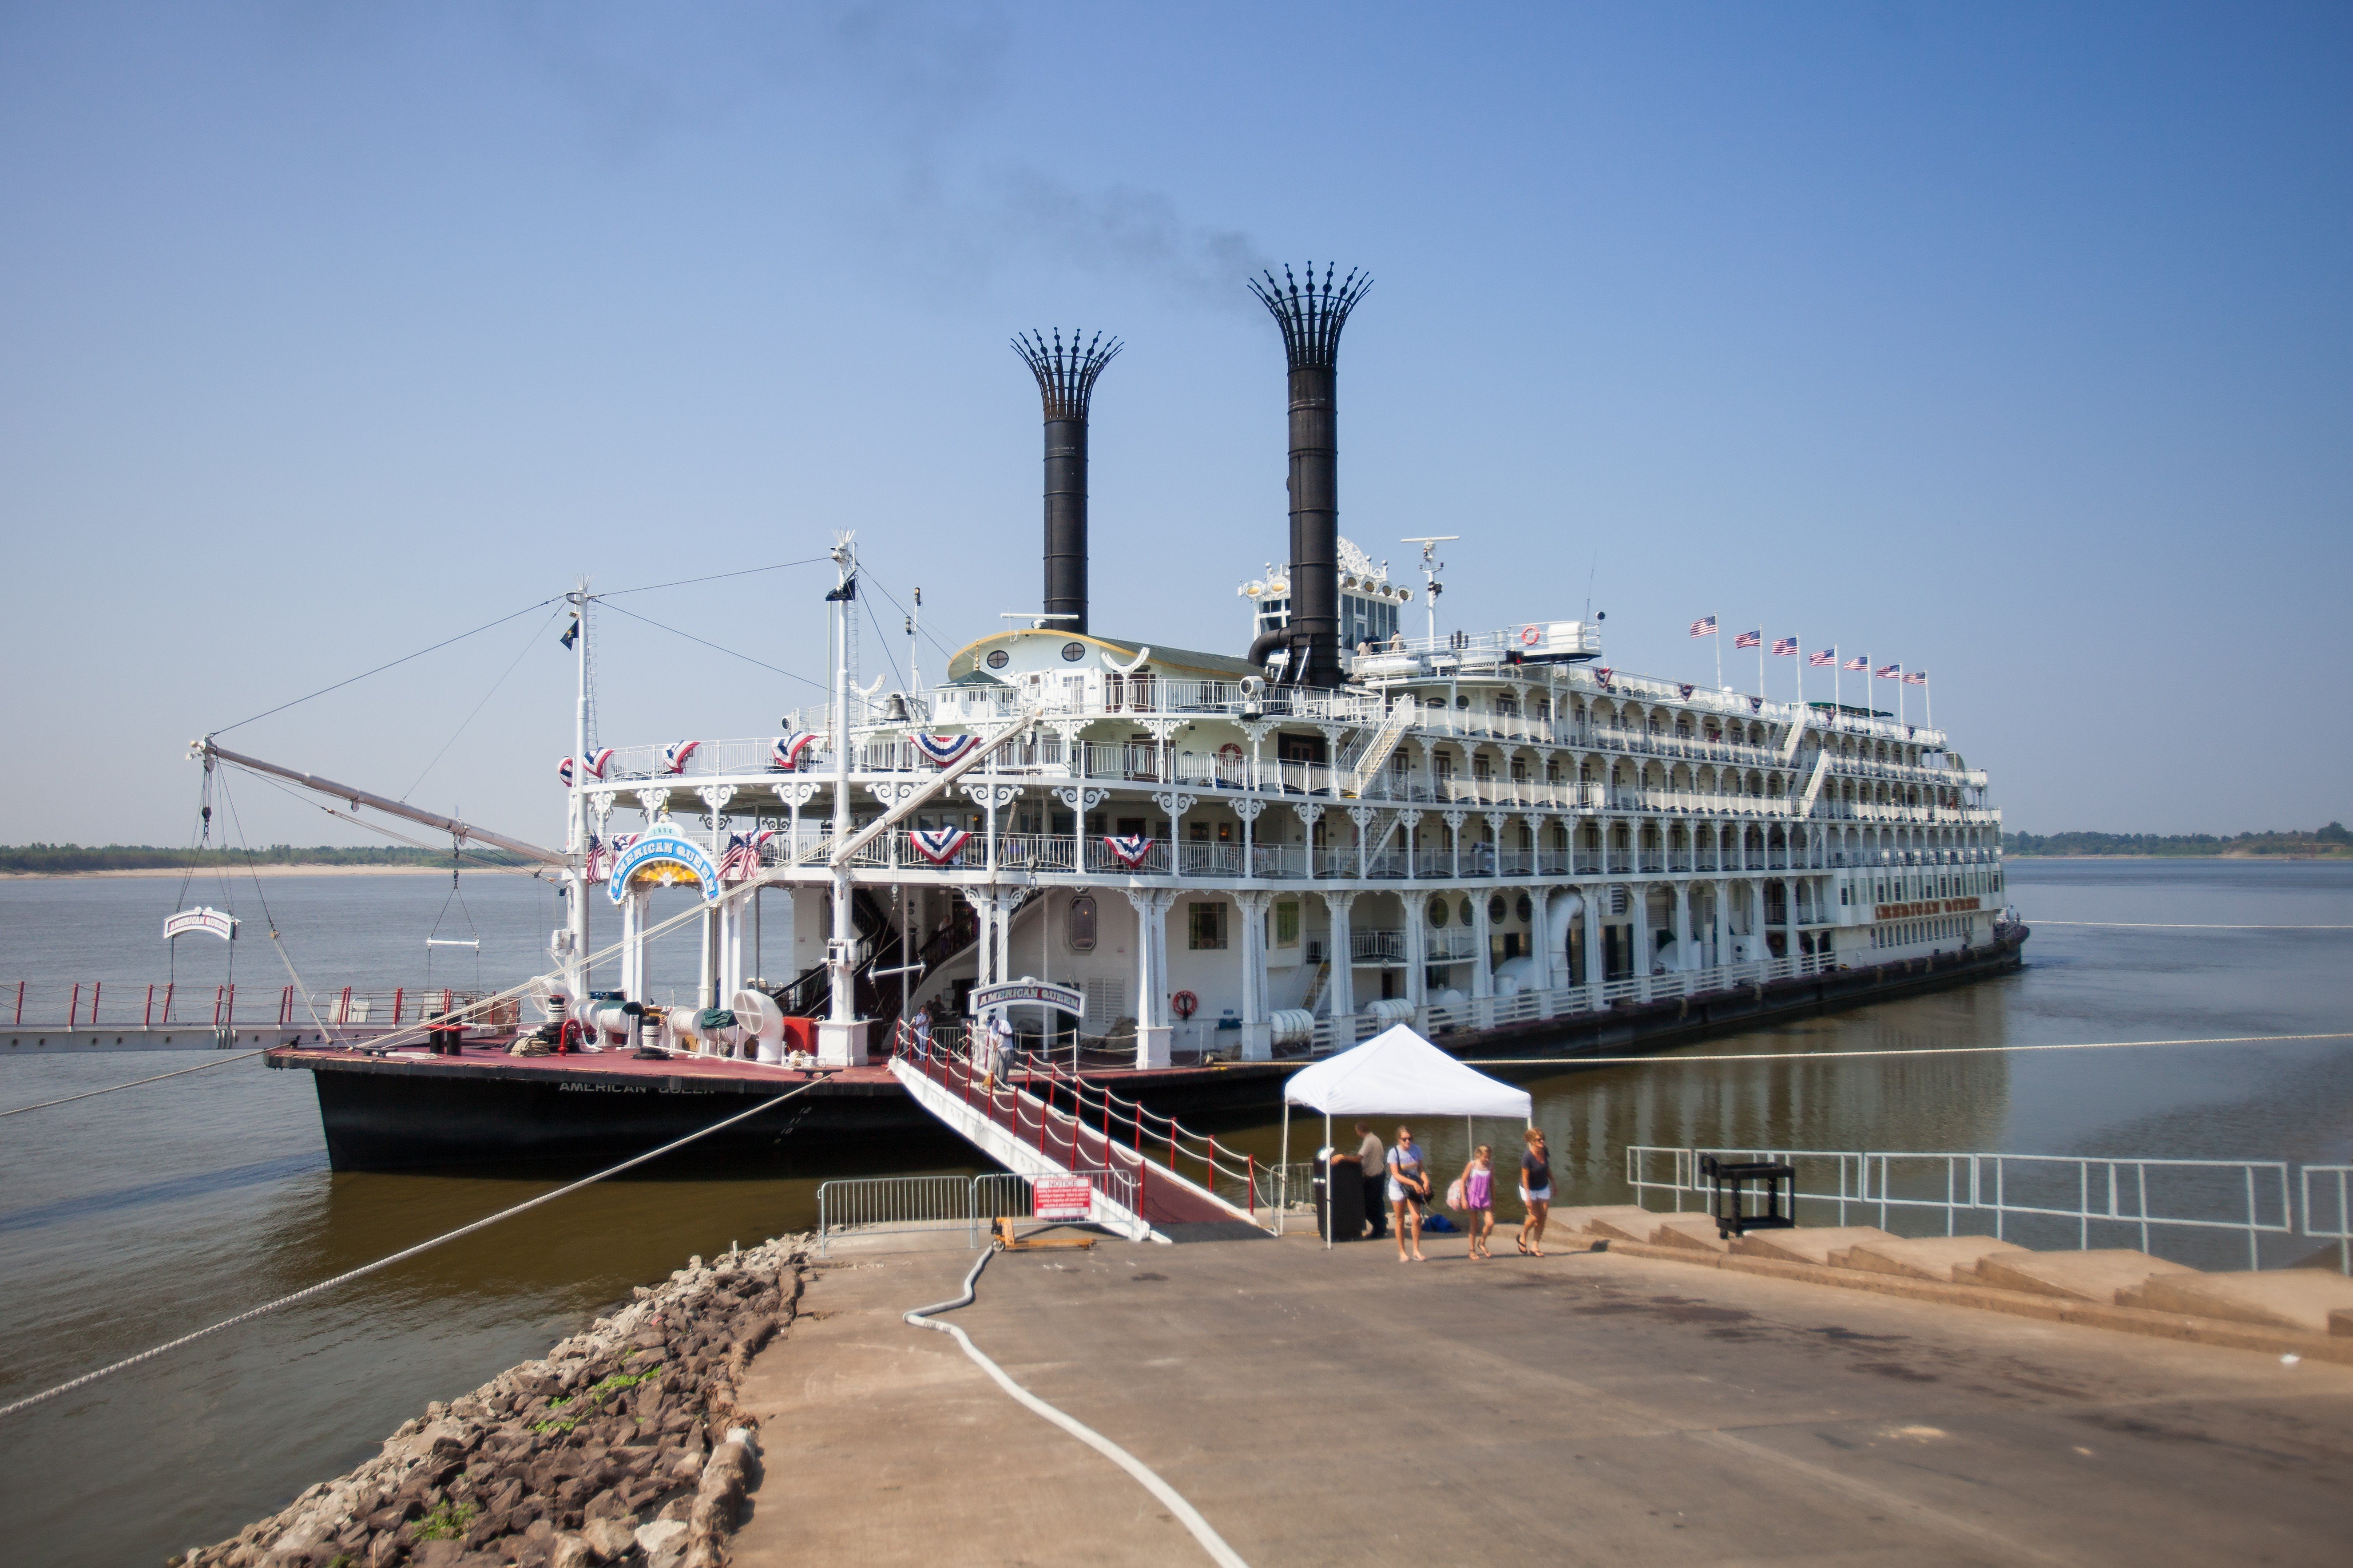 american queen riverboat tours